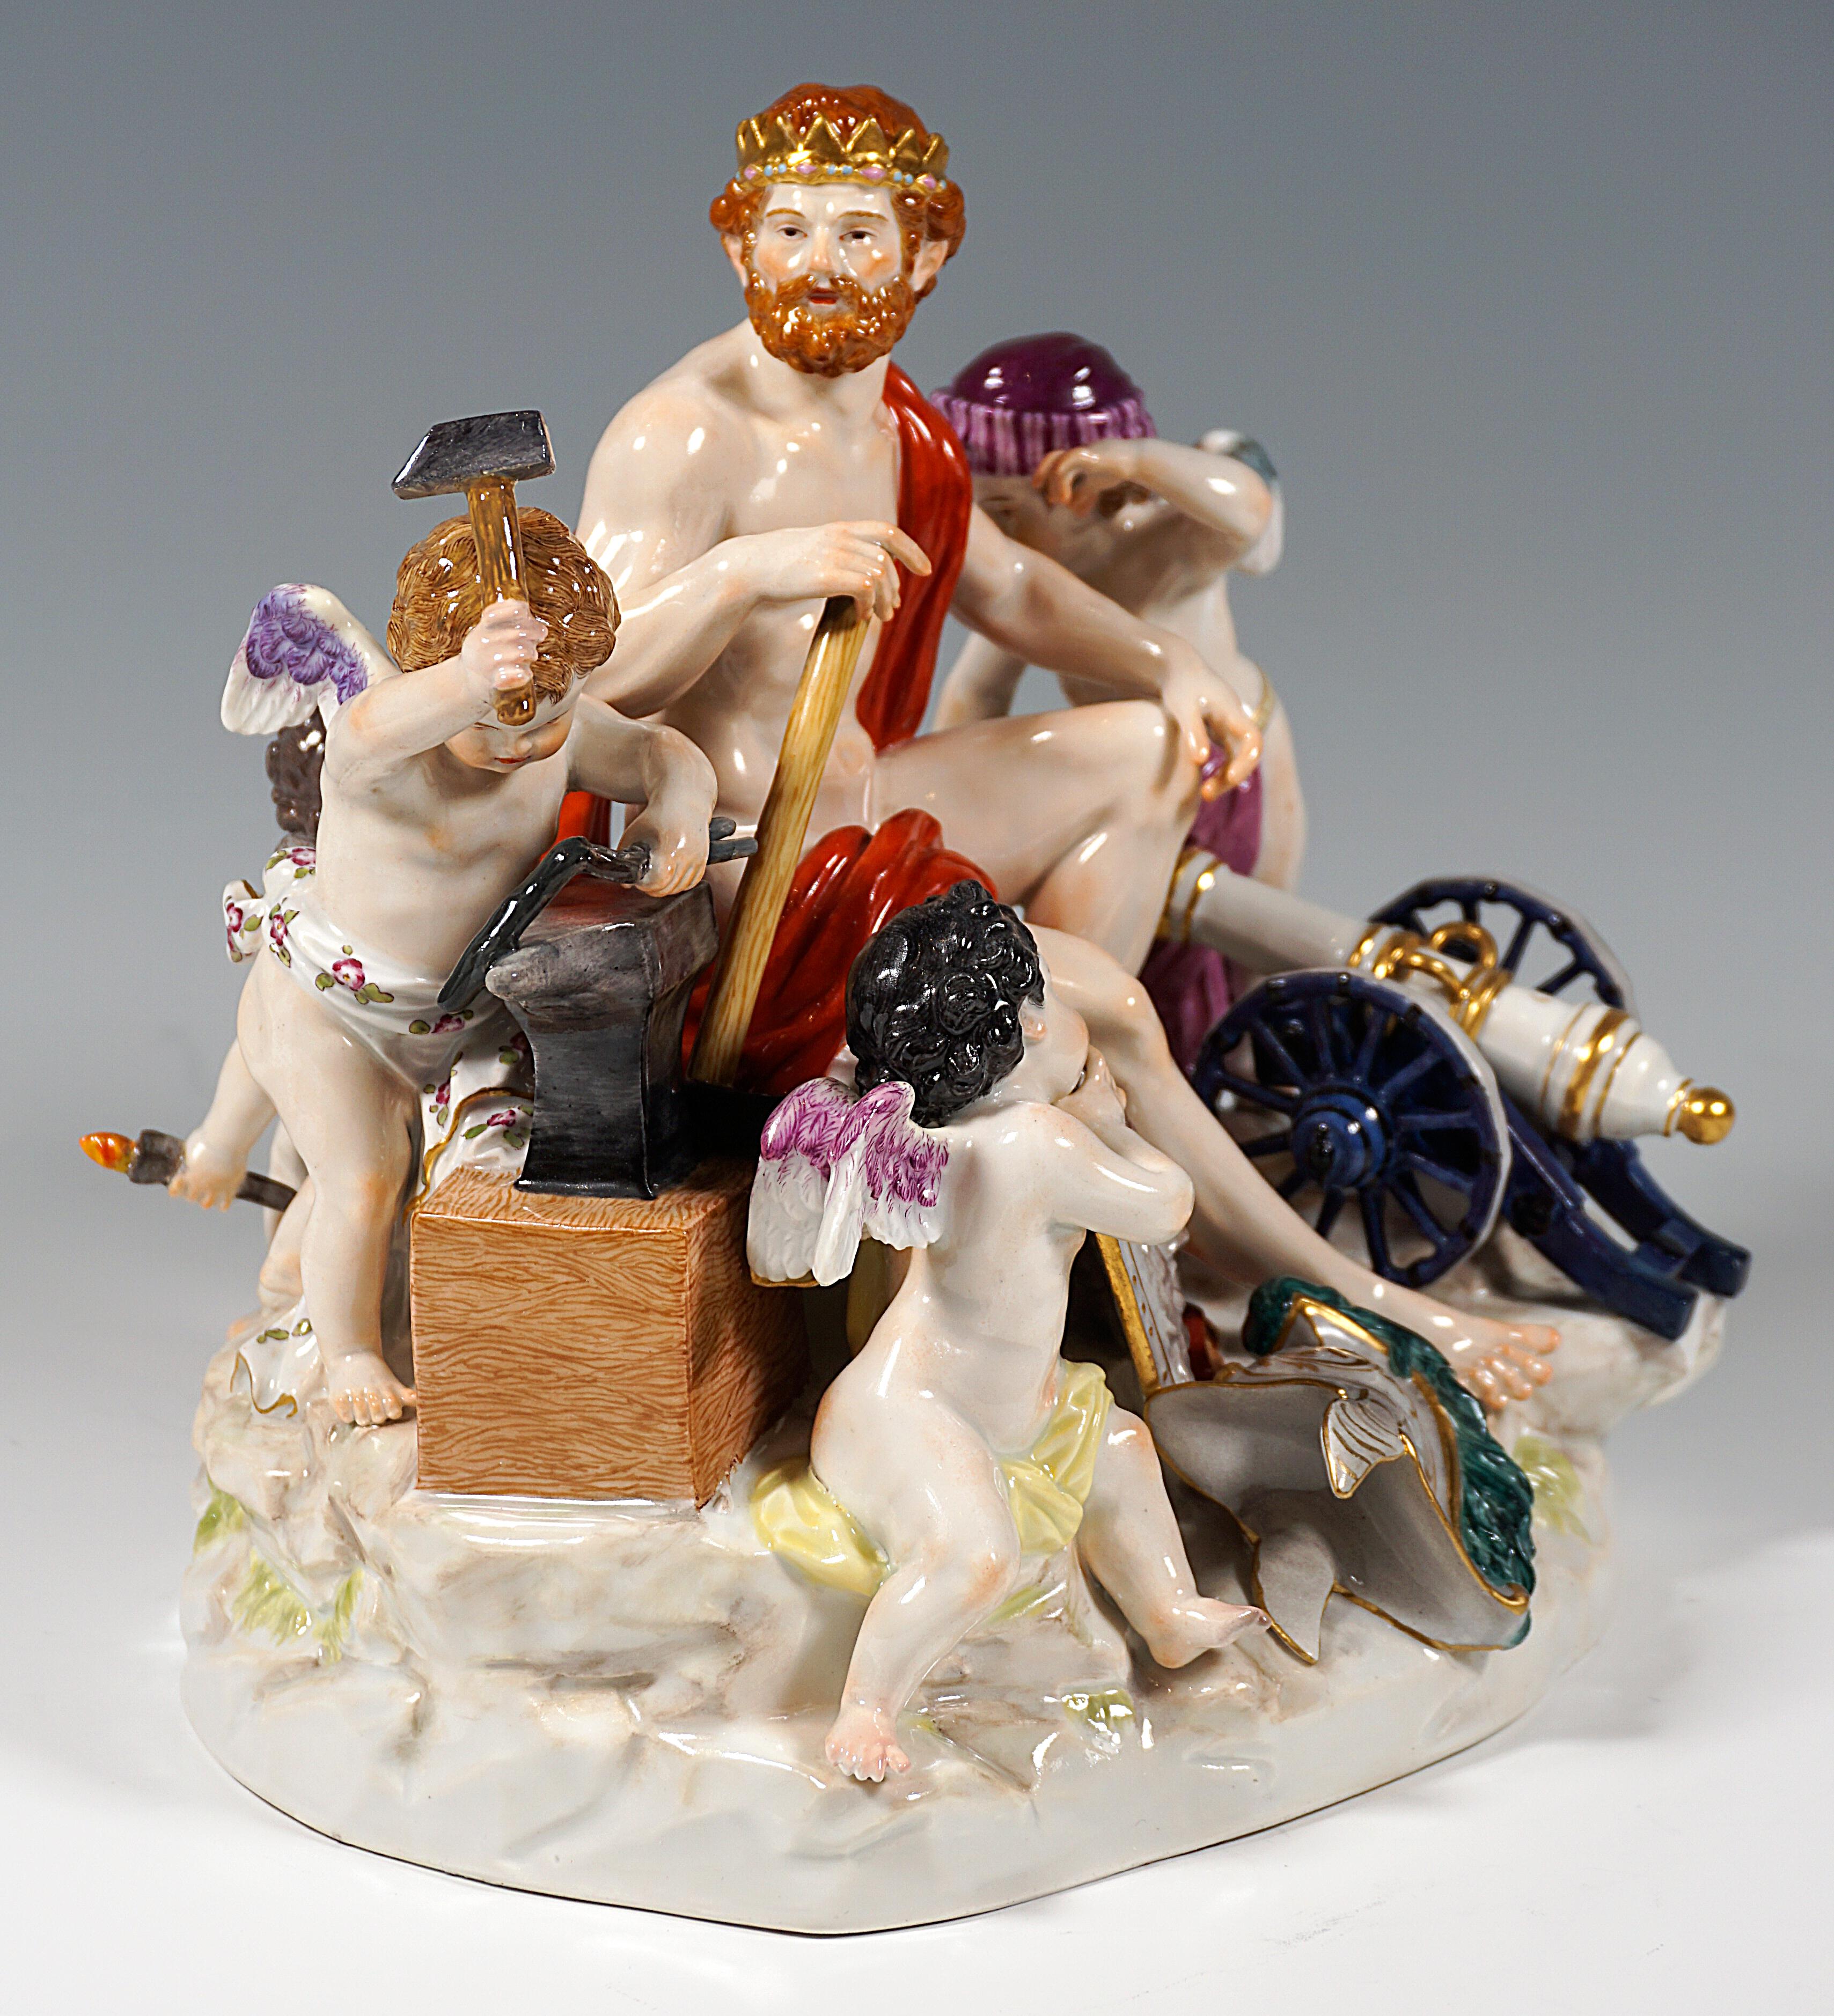 Excellent Meissen porcelain group of the 19th century:
Depiction of the merely cloth-covered, bearded and crowned god Hephaestus (Roman: Vulcanus) seated centrally on a rock, holding a long-handled hammer beside him and looking off to the side,